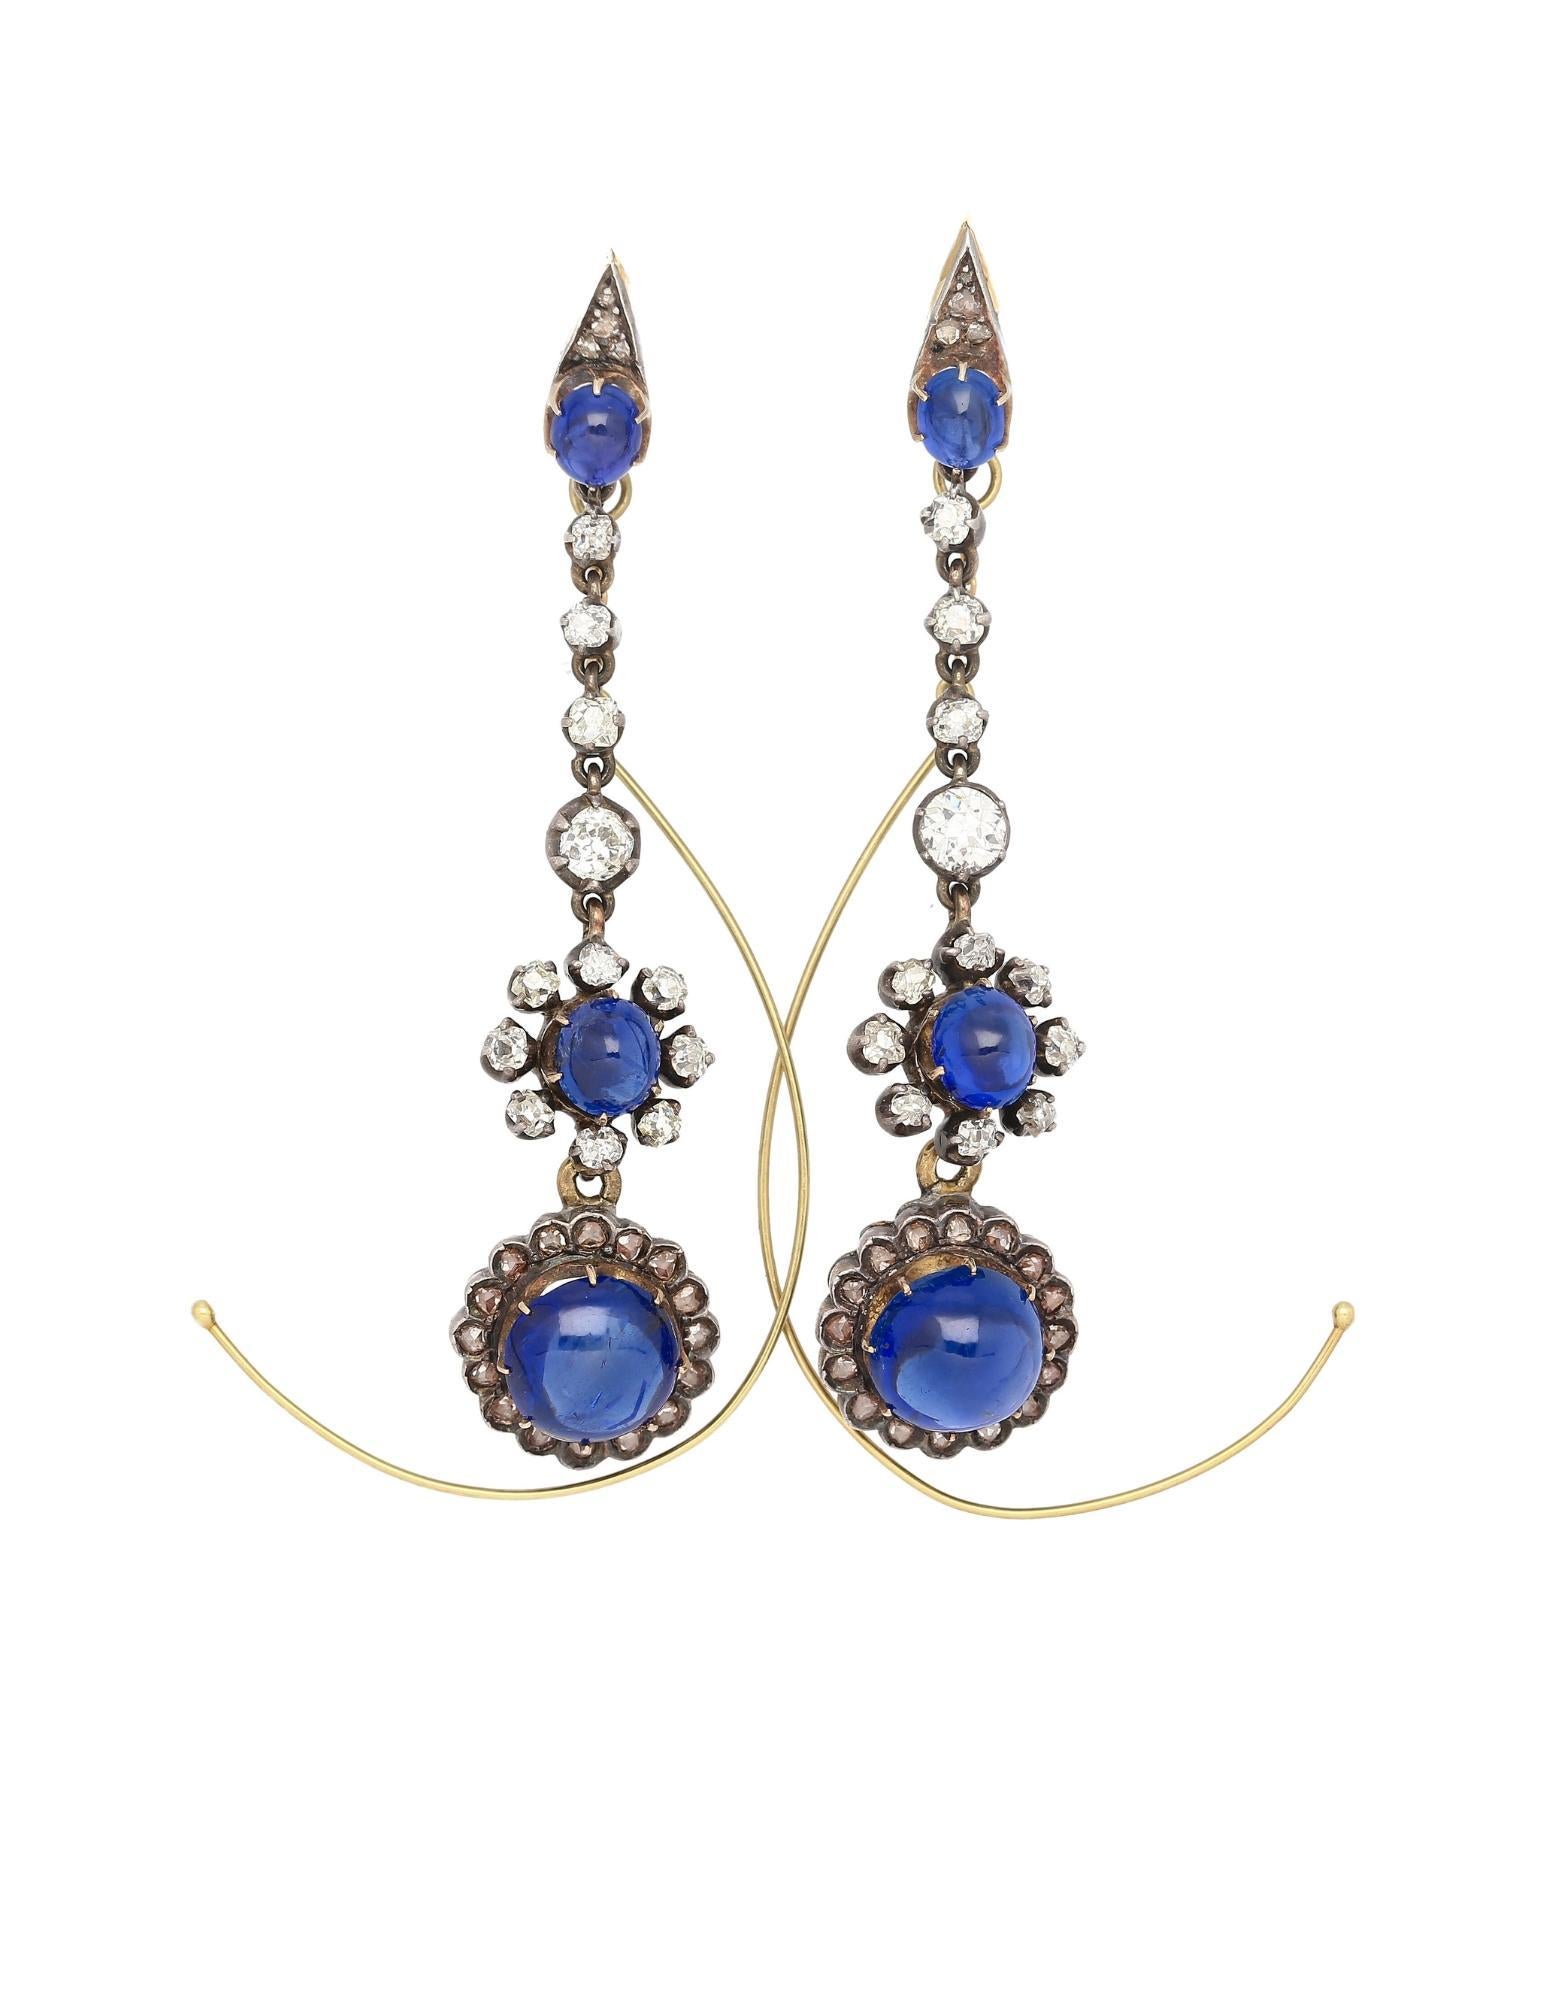 Jewelry Details:
Item Type: Earrings
Metal Type: 14K White Gold
Weight: 15.54 grams
Center Stone Details:
Gemstone Type: Sapphire
Origin: Burma
Treatment: No Heat
Certification: AGL Certified
Certificate Number: 1098150
Carat: 16 Carats